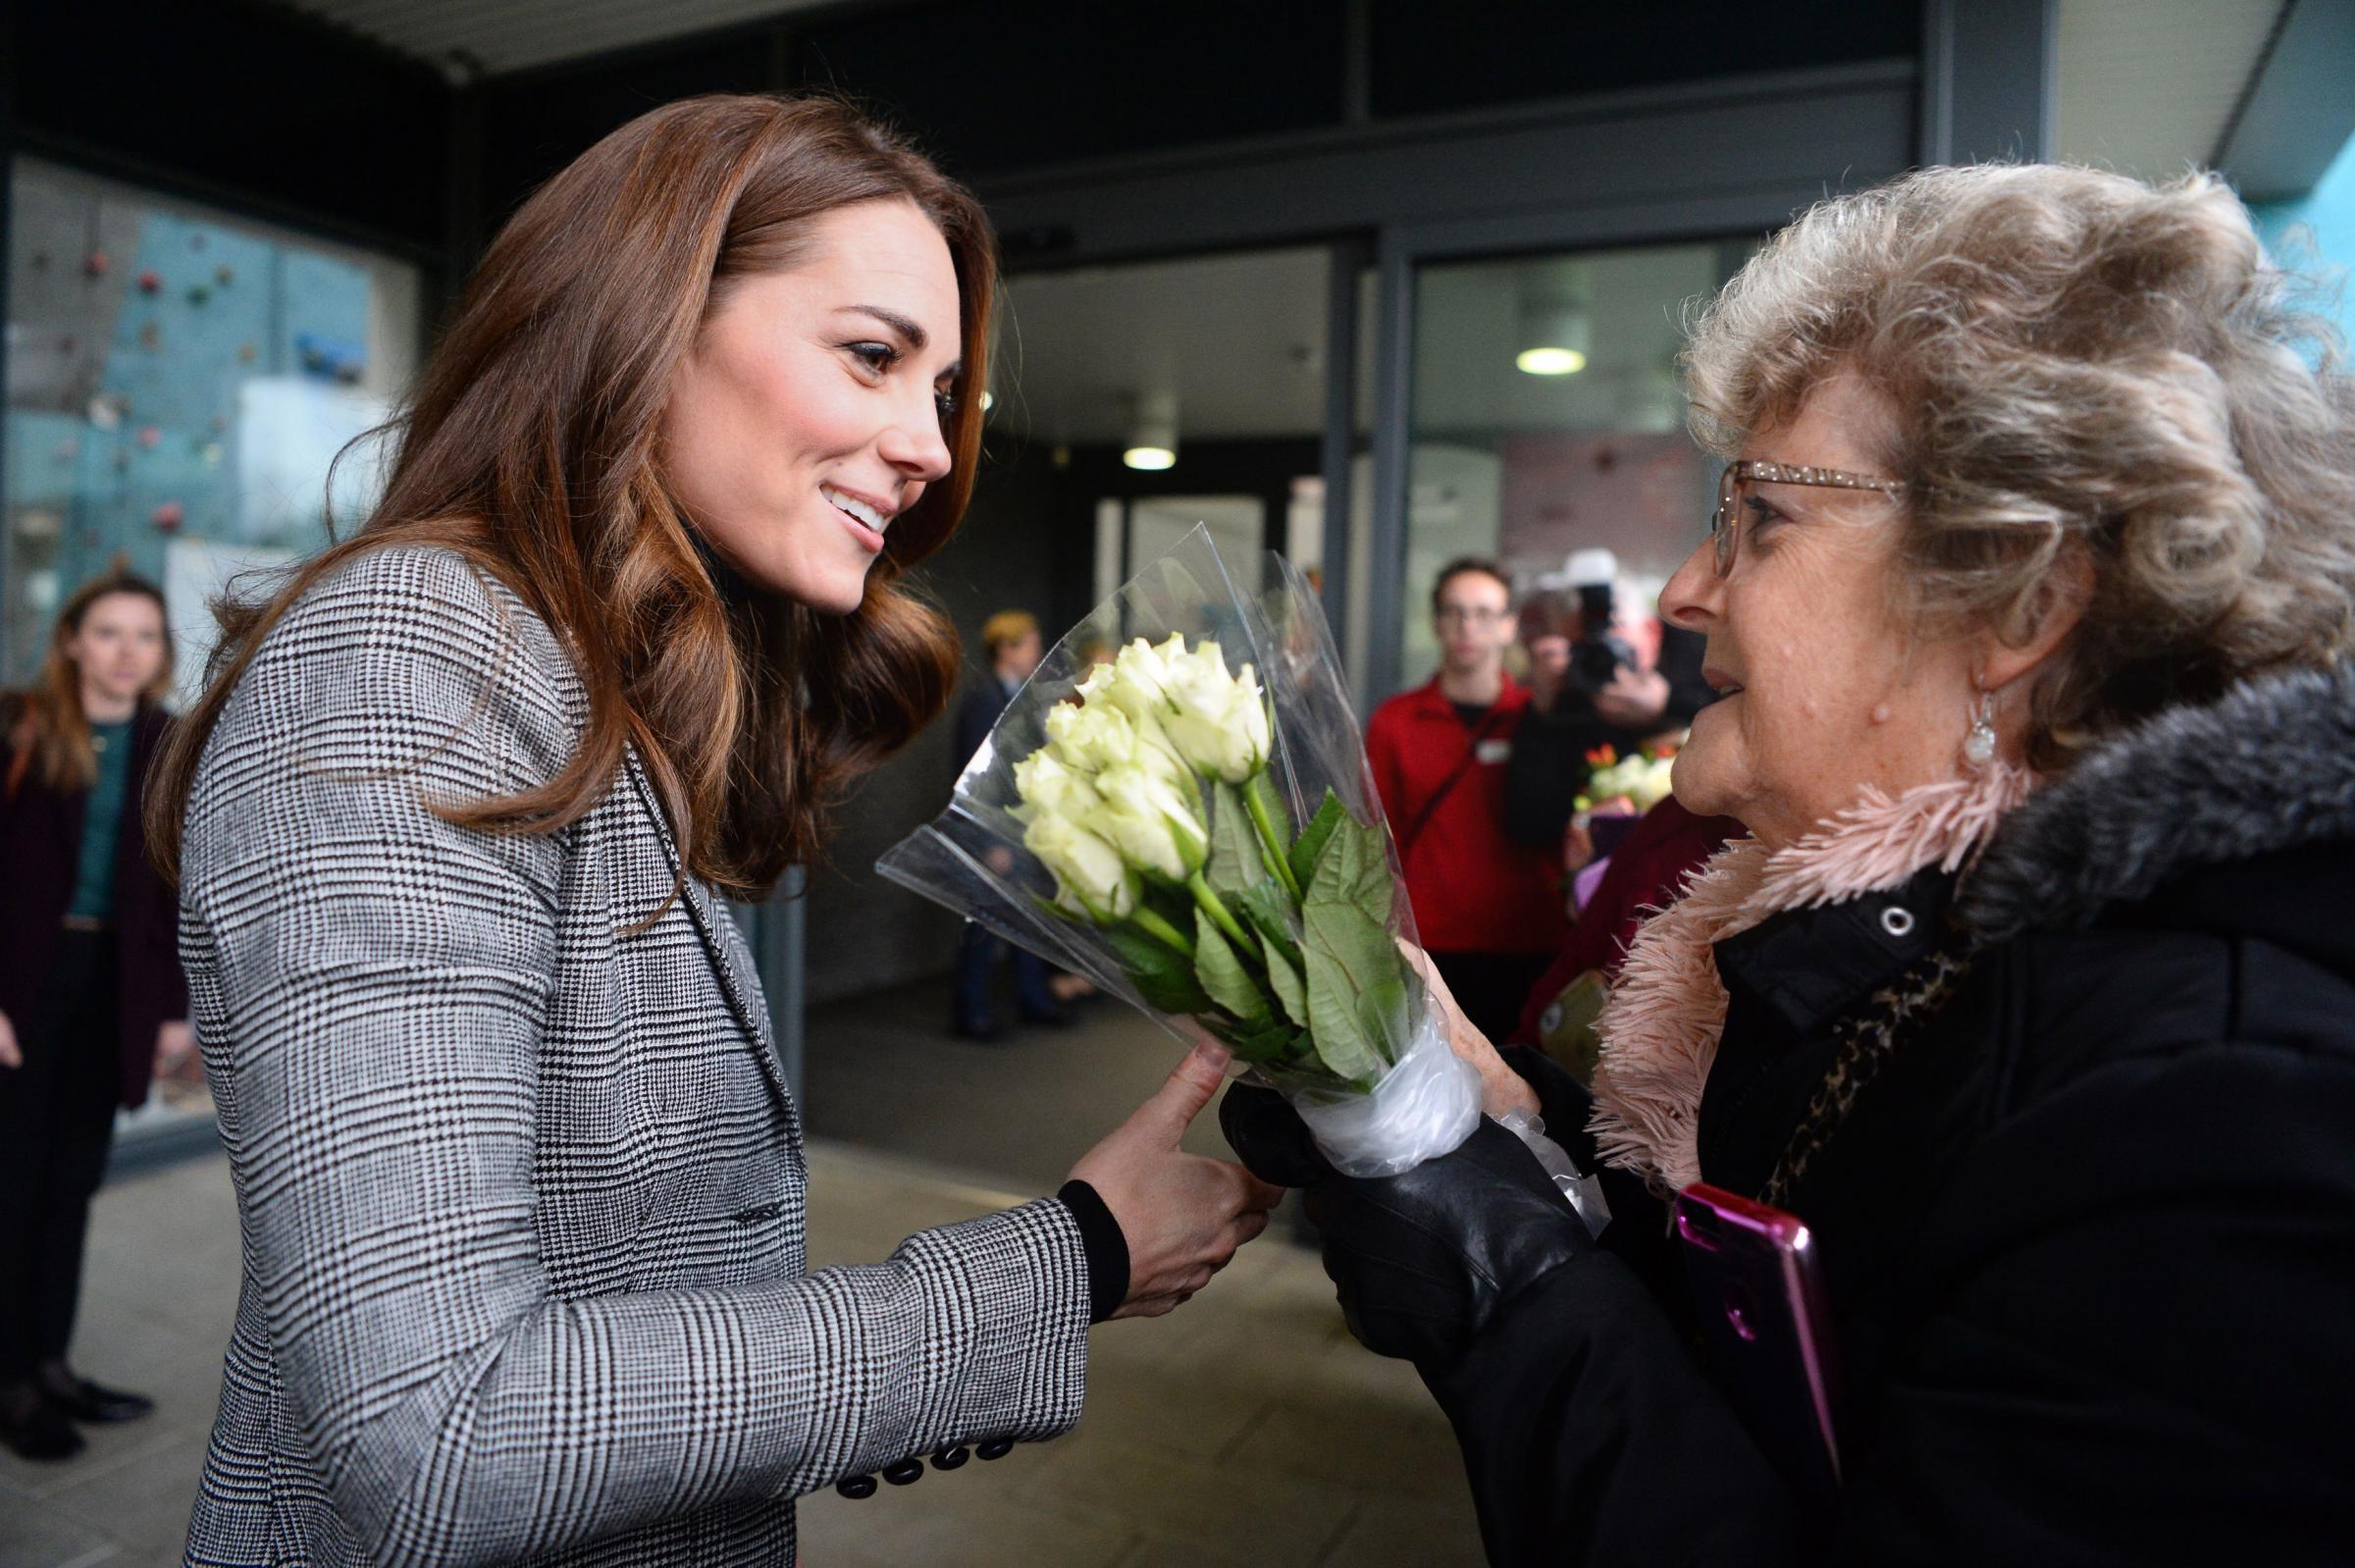 In conversation - Princess Kate, the Duchess of Cambridge, speaks to a Basildon resident when she visited the town close to two-and-a-half years ago 